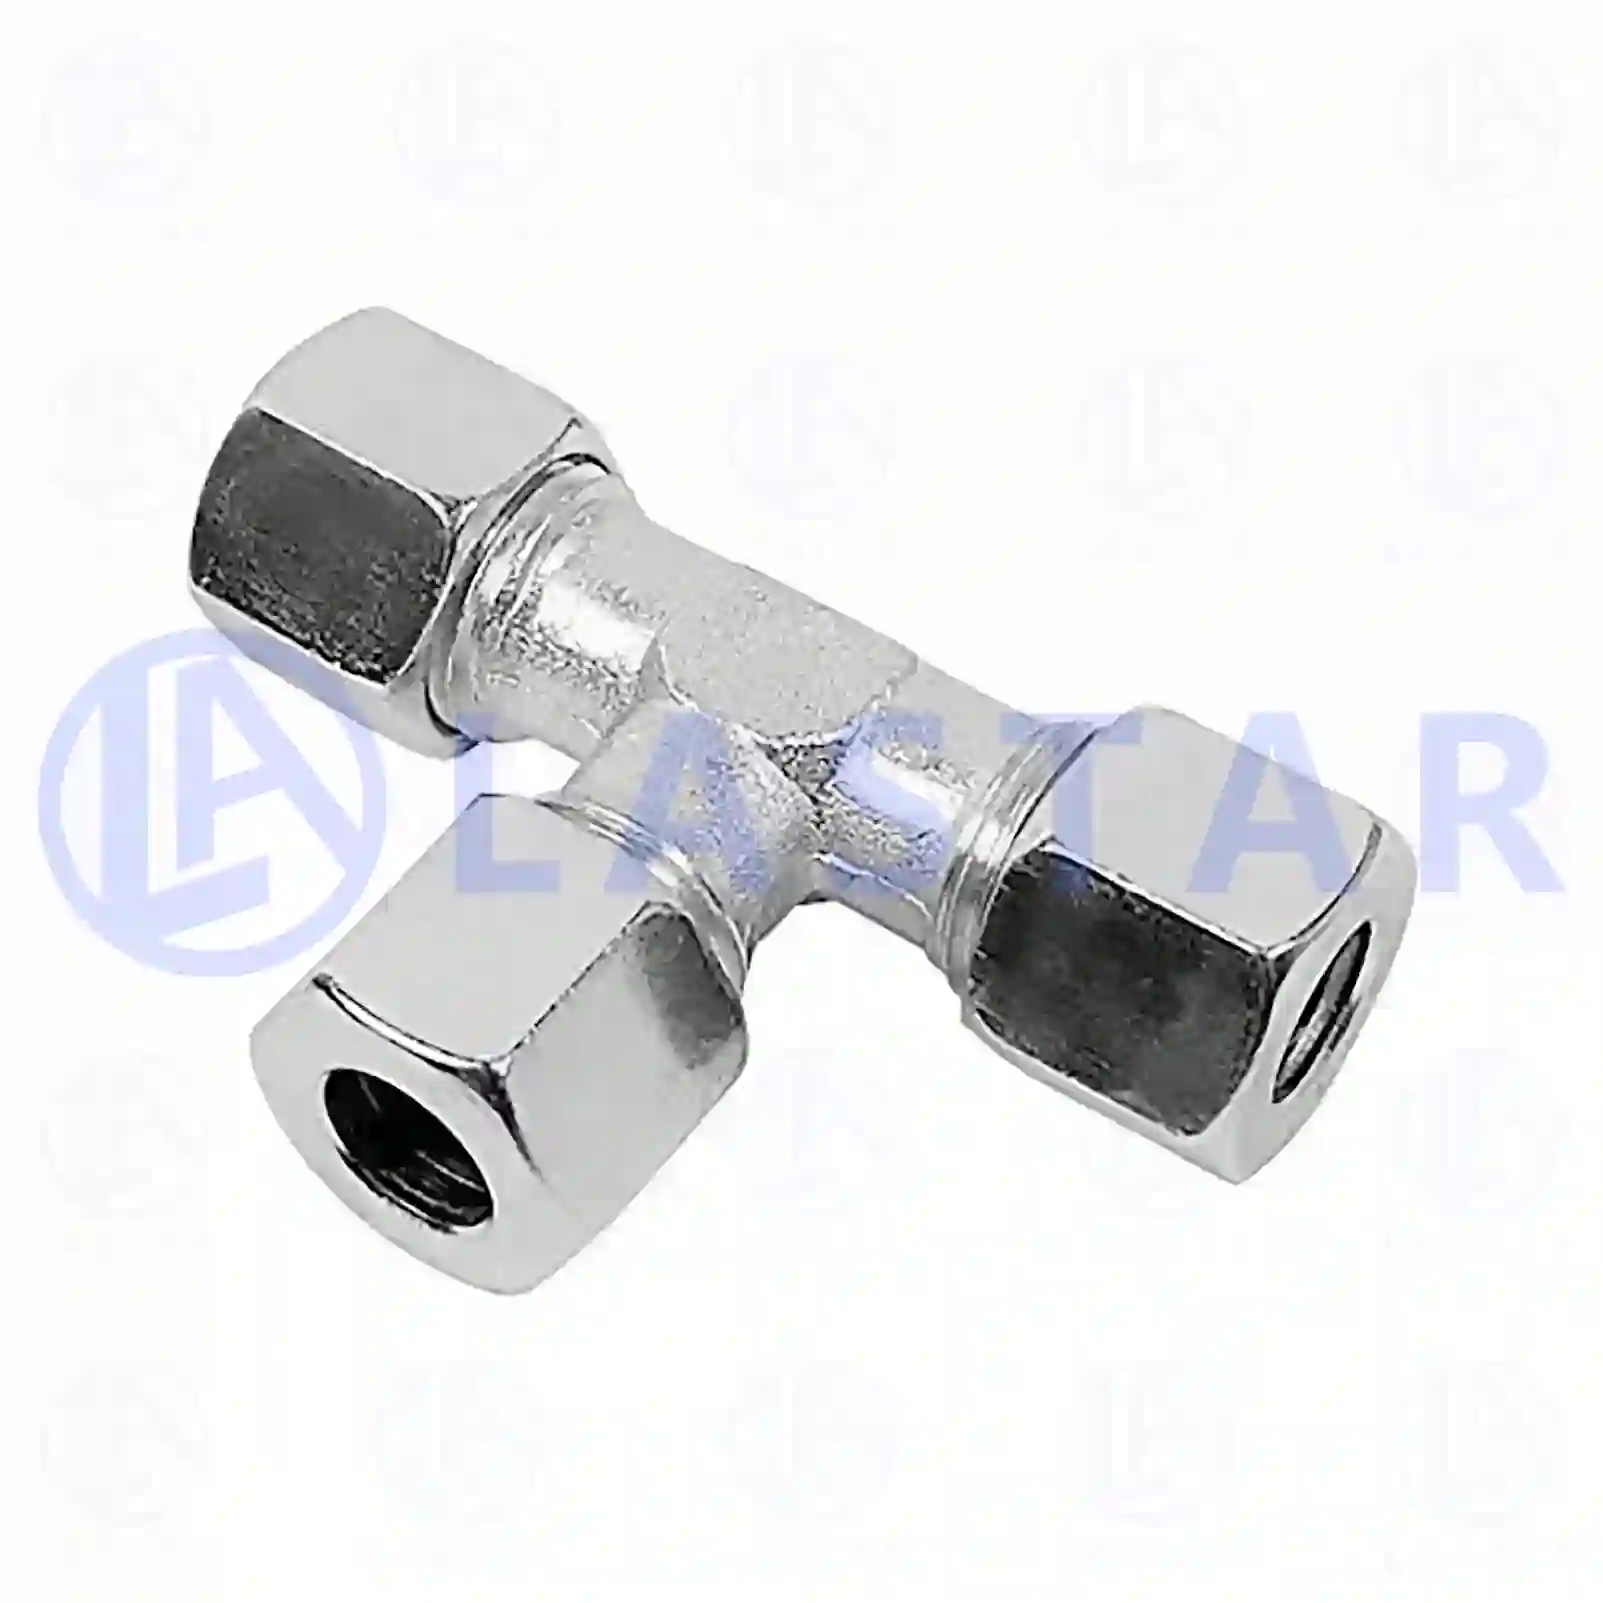 T-connector, 77725607, F278880020030, CF3515699, 1912270, 20089370, 7351771 ||  77725607 Lastar Spare Part | Truck Spare Parts, Auotomotive Spare Parts T-connector, 77725607, F278880020030, CF3515699, 1912270, 20089370, 7351771 ||  77725607 Lastar Spare Part | Truck Spare Parts, Auotomotive Spare Parts